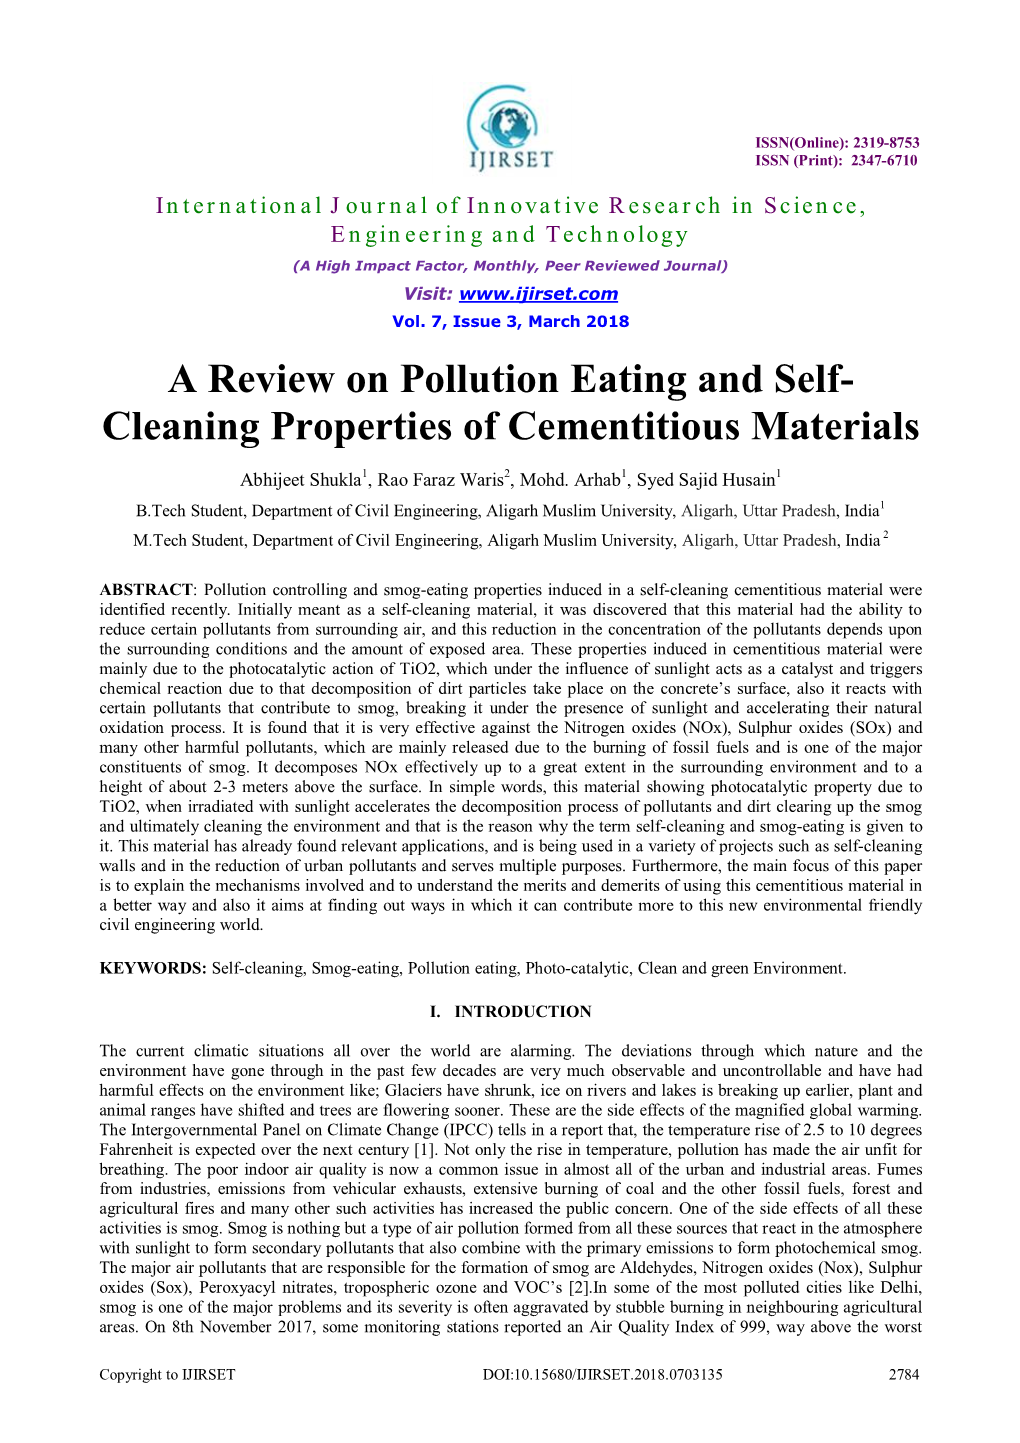 A Review on Pollution Eating and Self- Cleaning Properties of Cementitious Materials